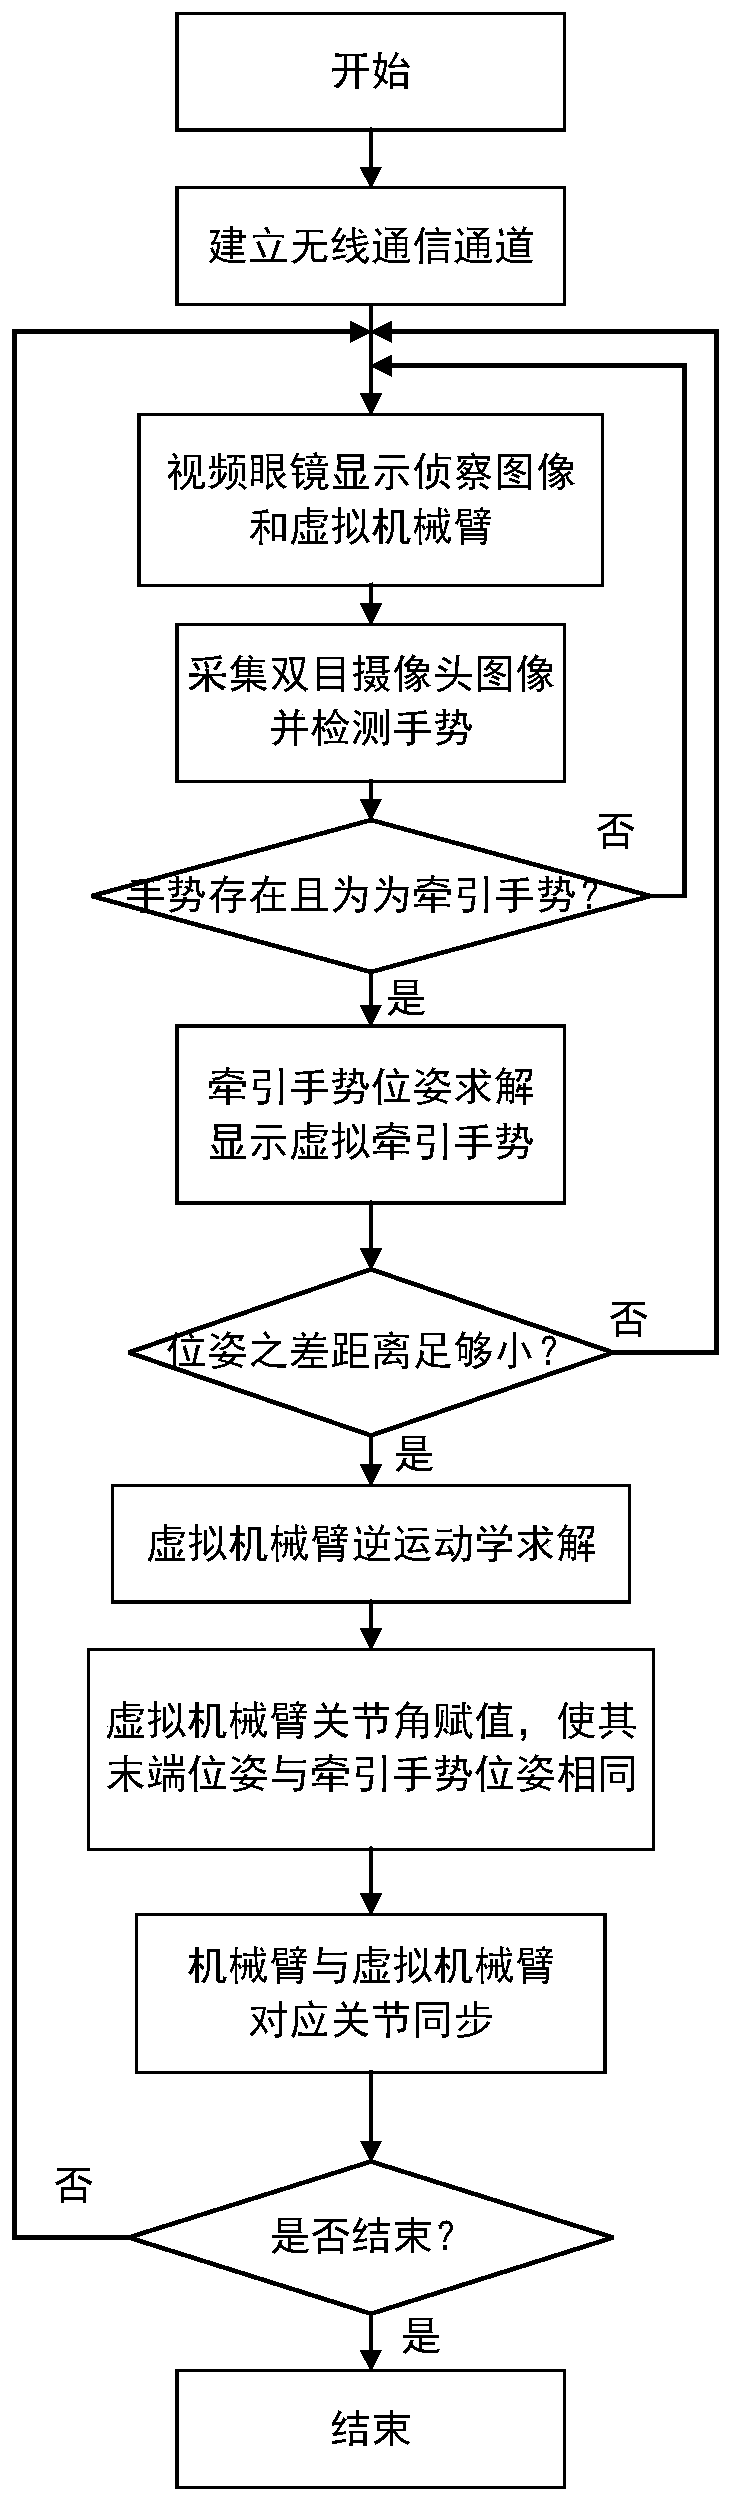 Mobile robot control system and teleoperation control method of robot tail end pose